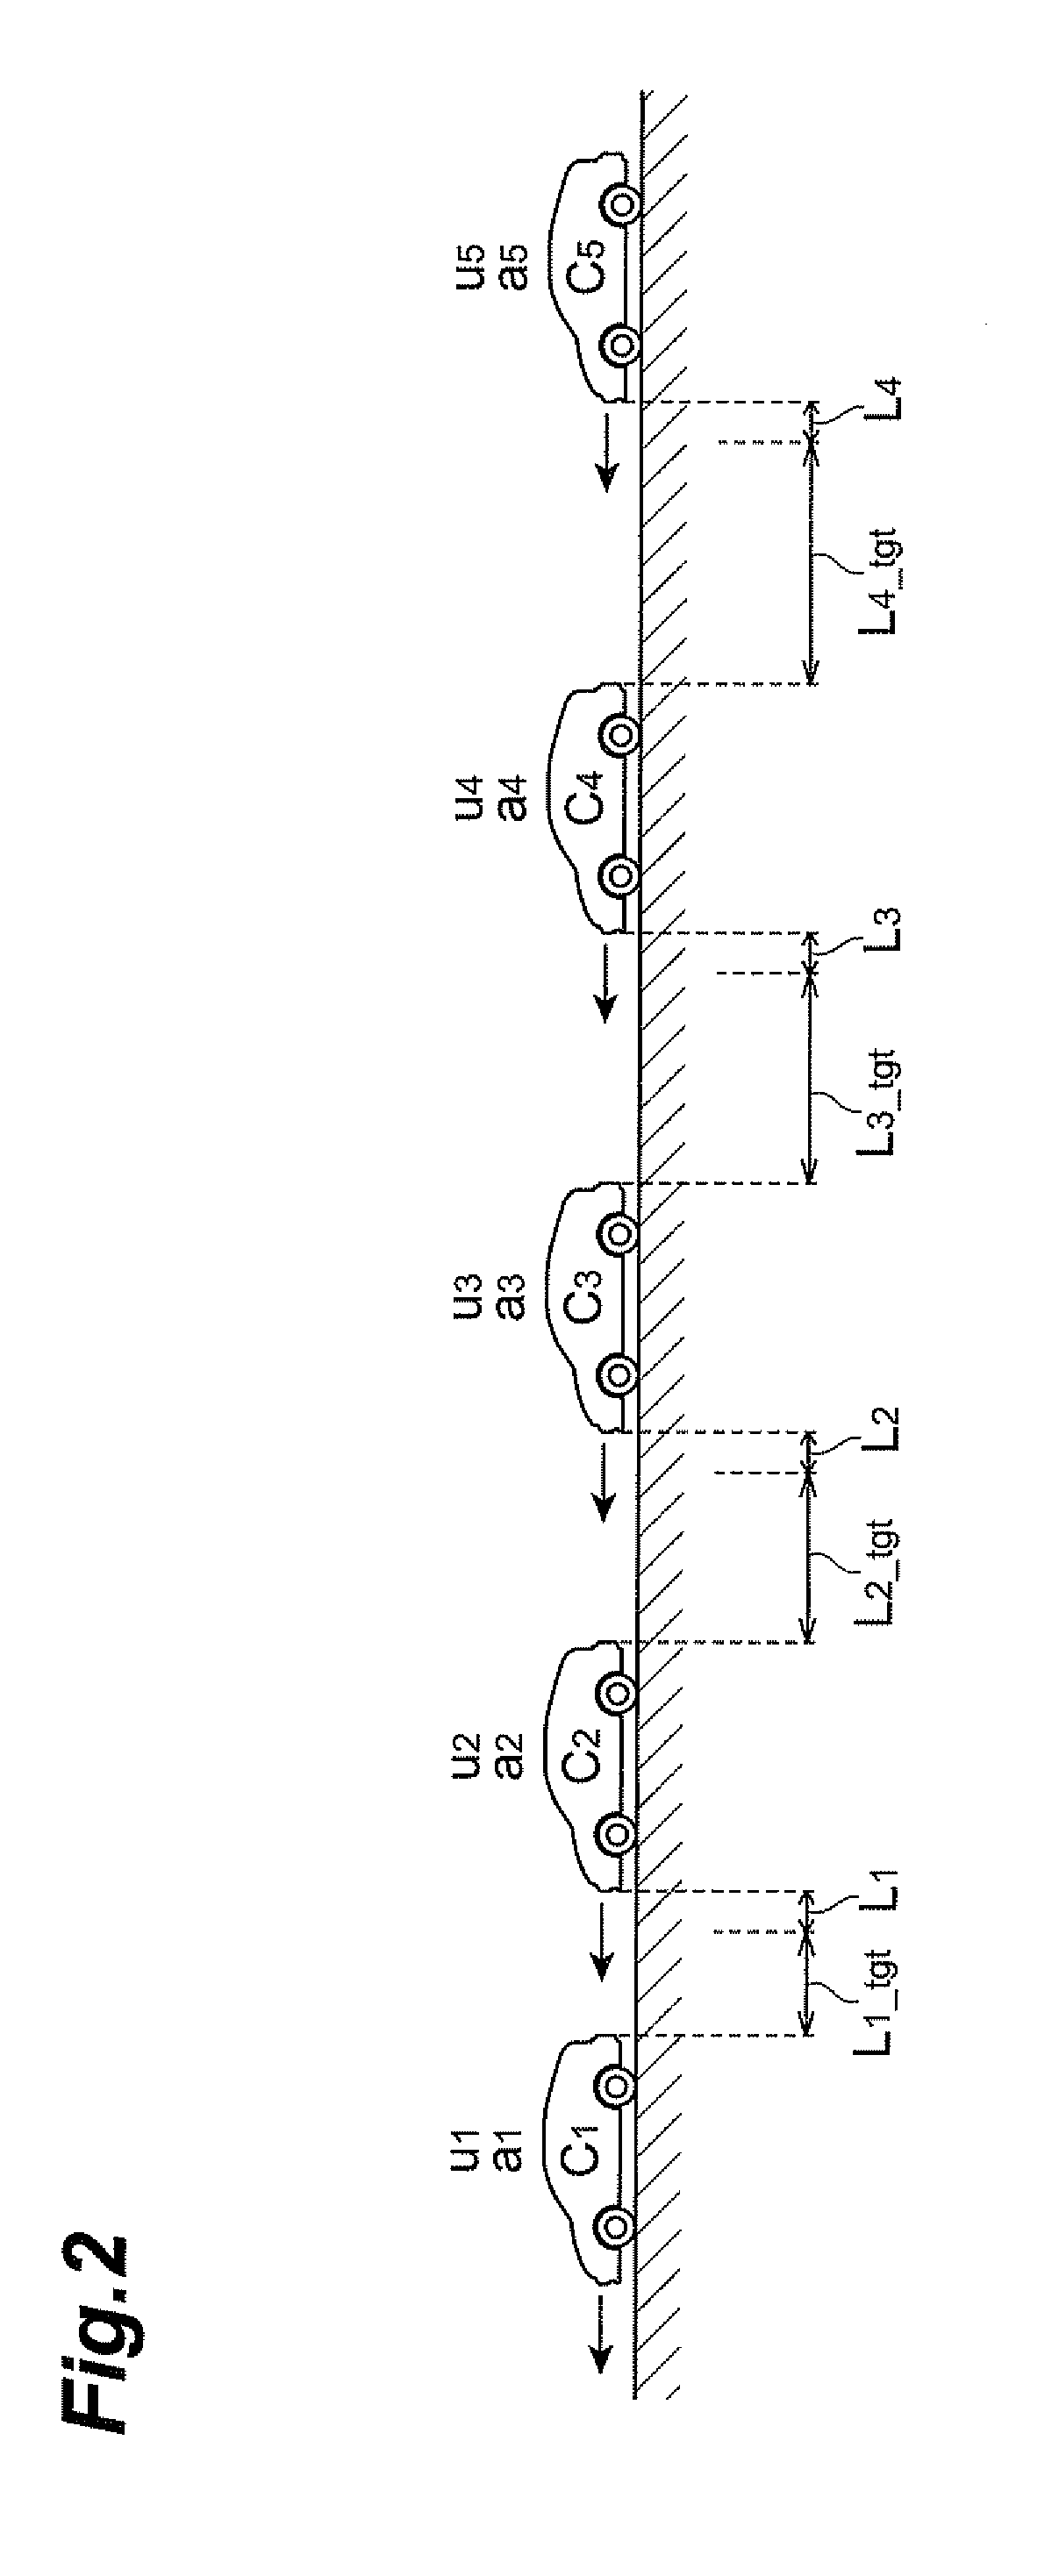 Row-running control system and vehicle